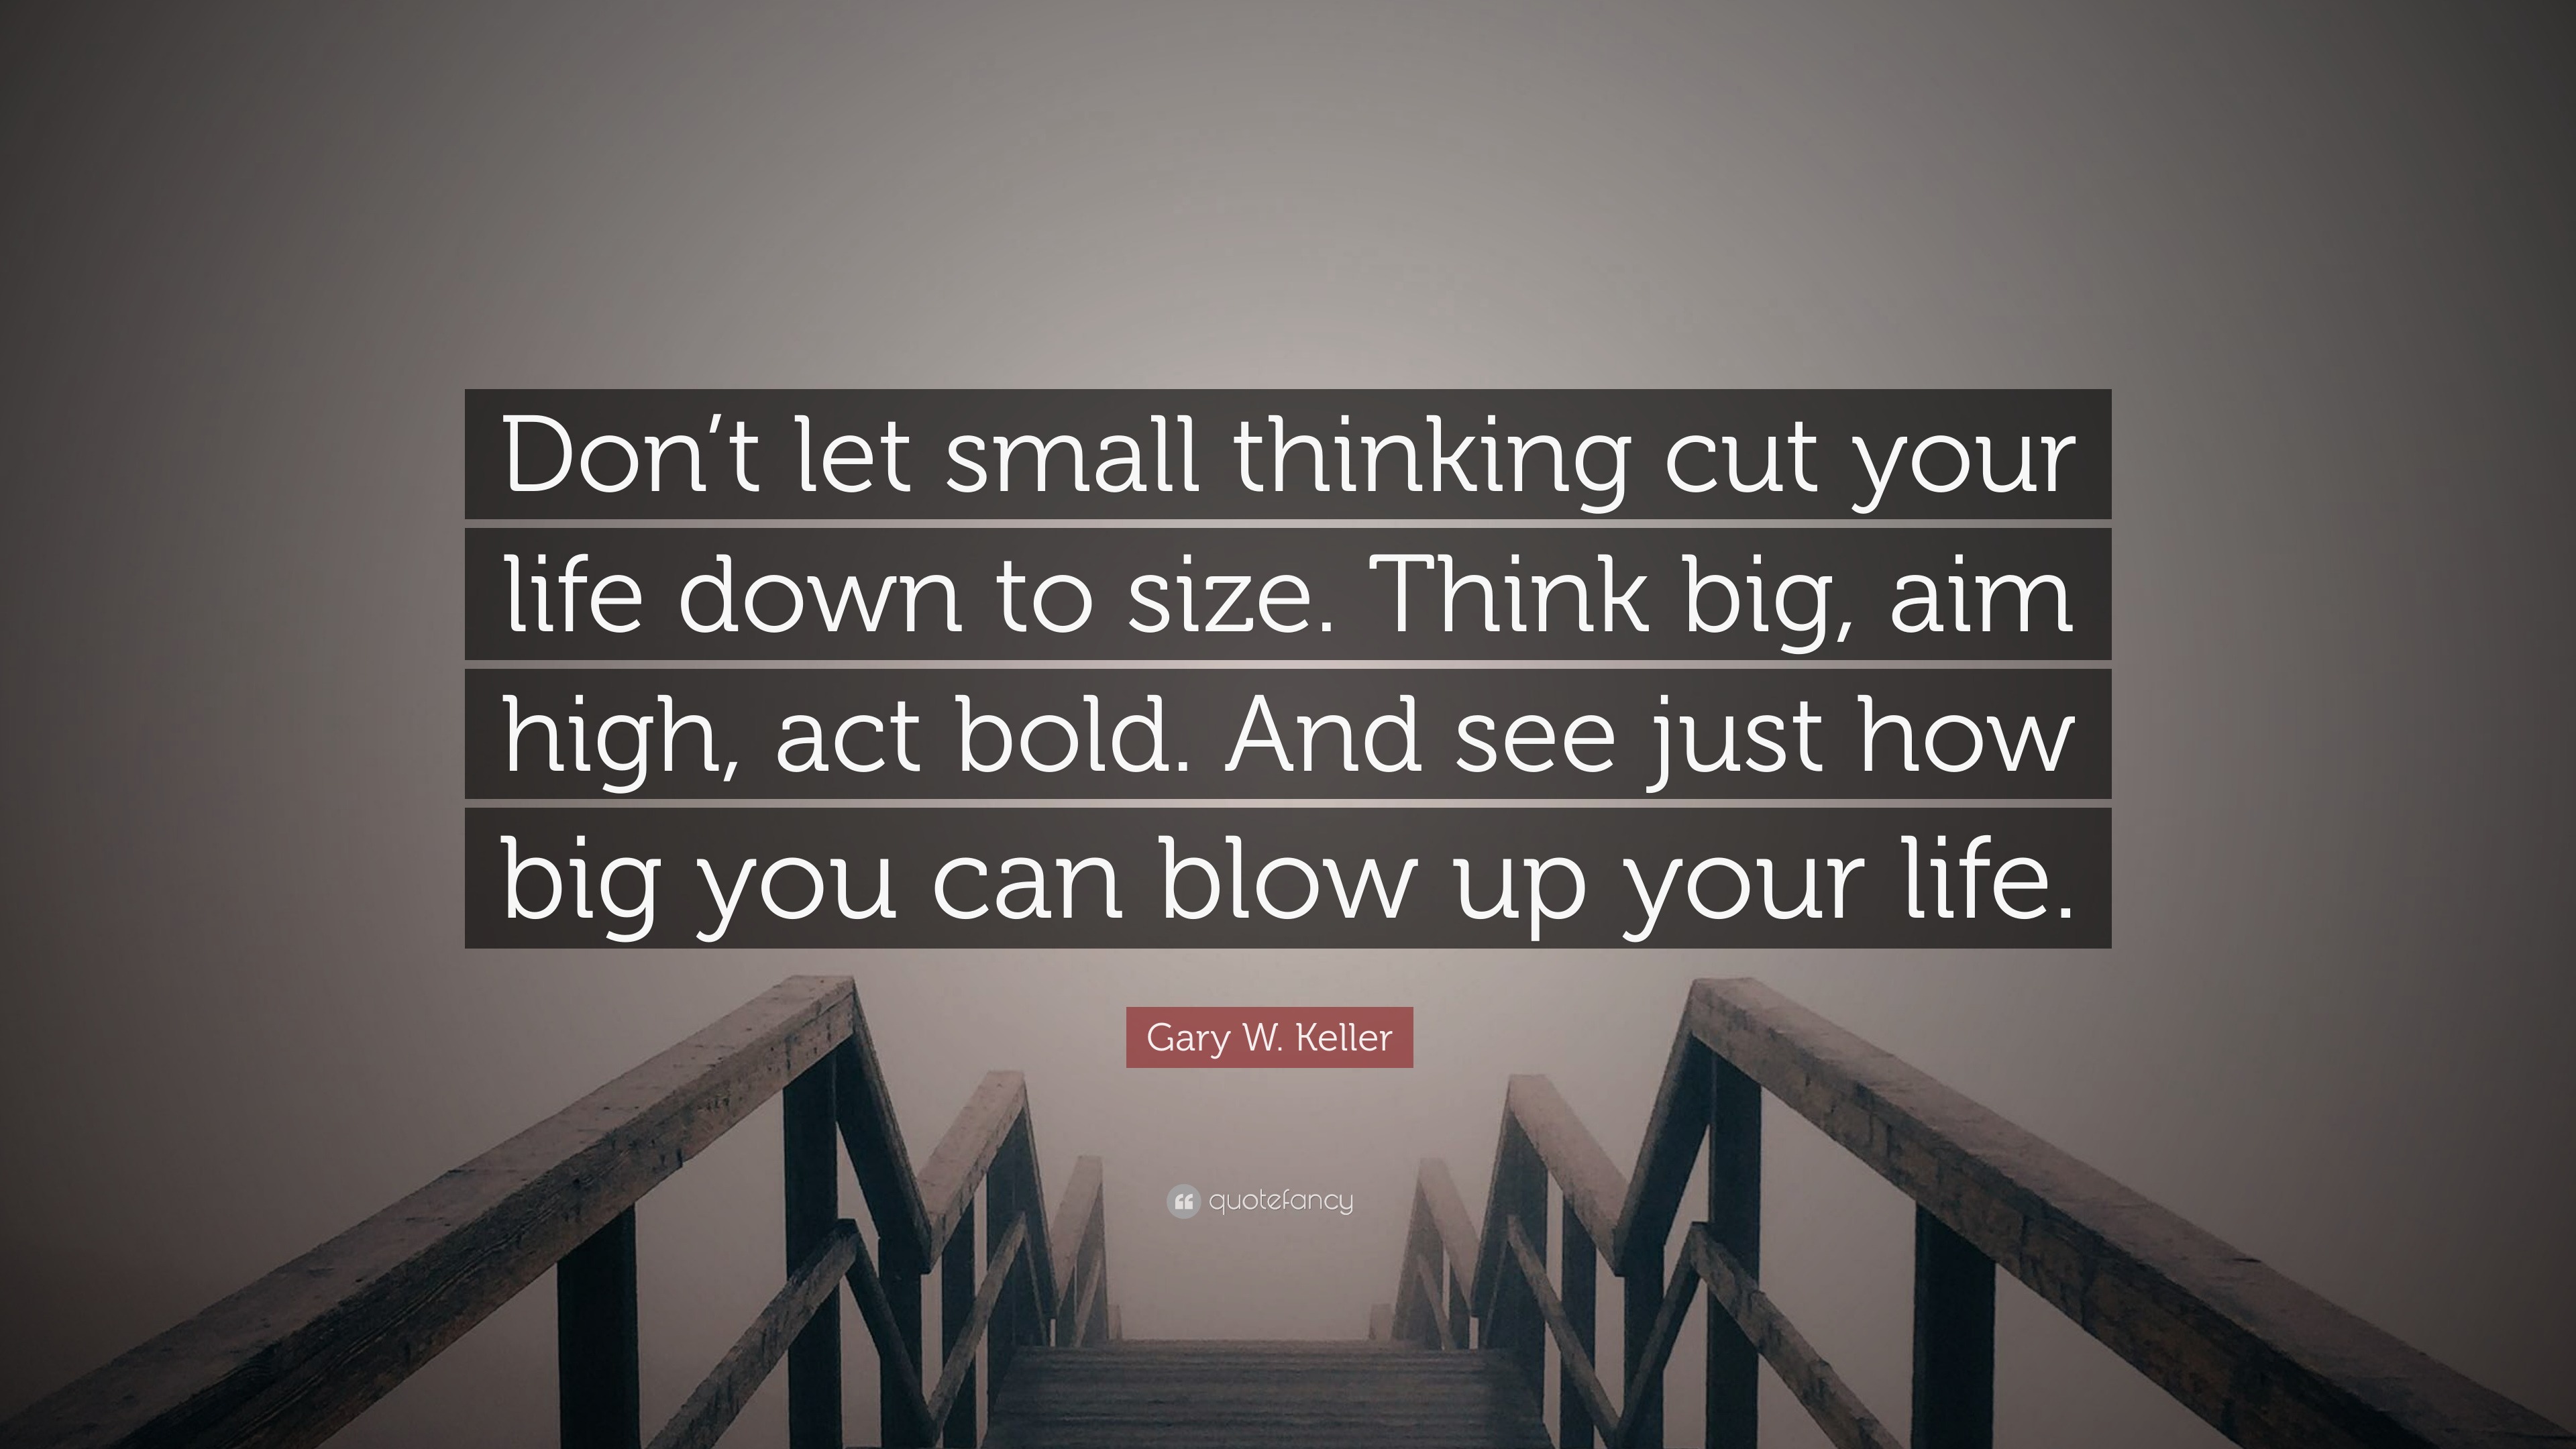 Gary W. Keller Quote: “Don't let small thinking cut your life down to size.  Think big, aim high, act bold. And see just how big you can blow up”